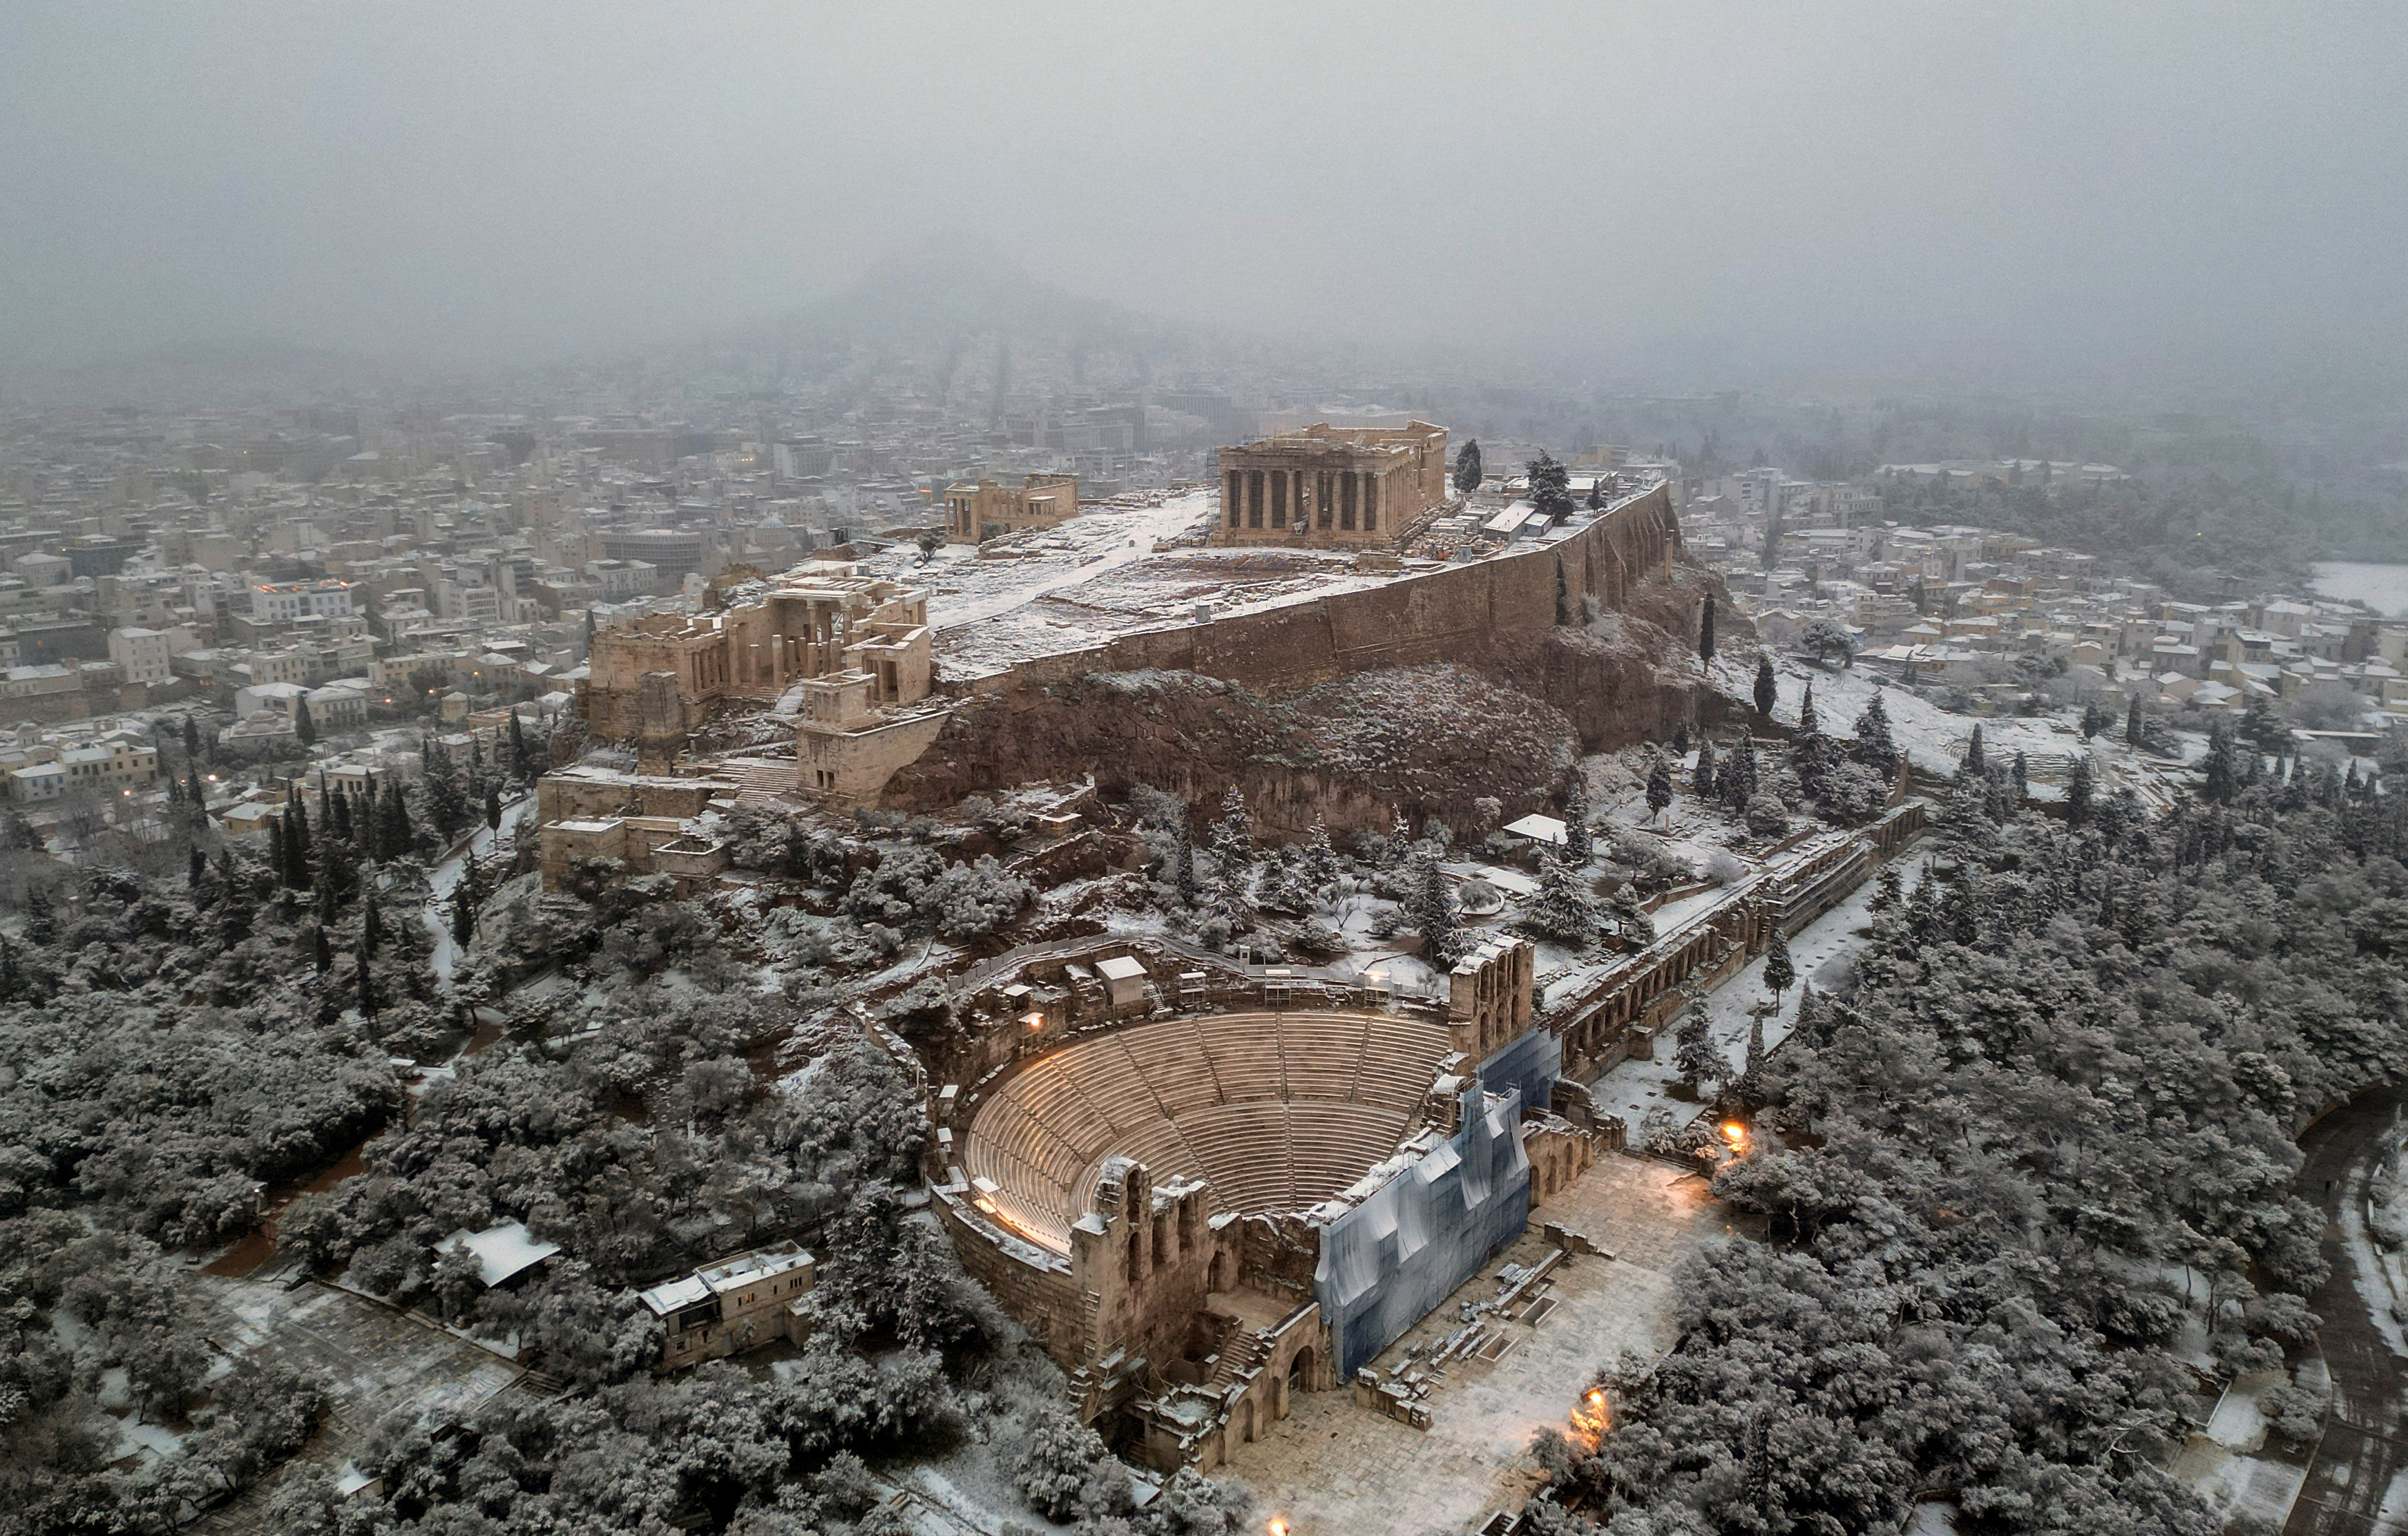 Snowfall in Athens